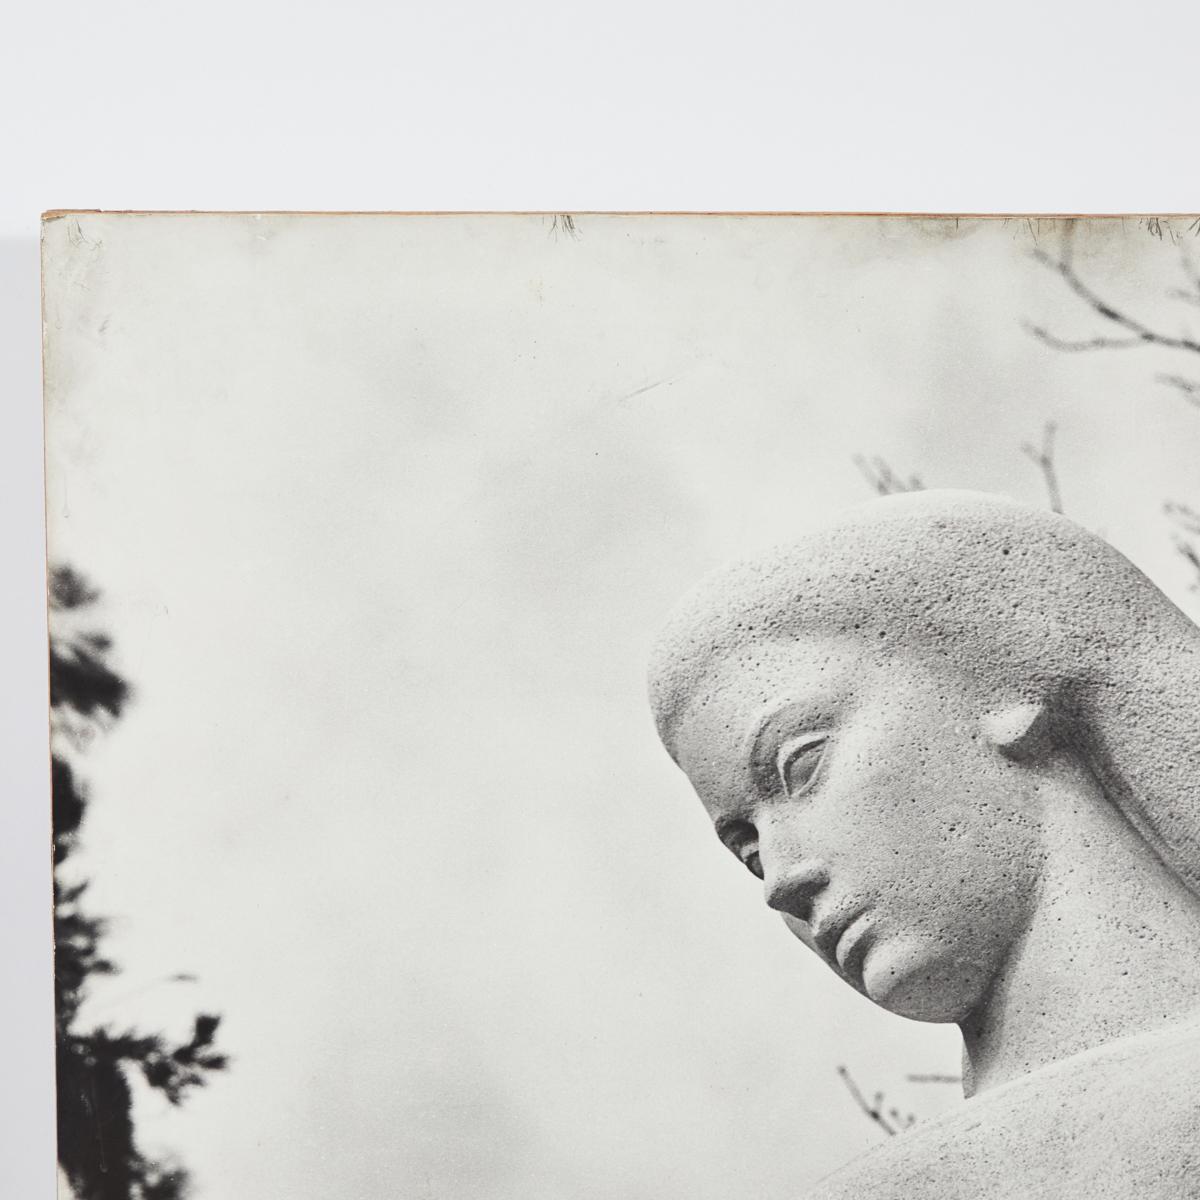 Large black and white photograph of female sculpture dating from 1960s France.